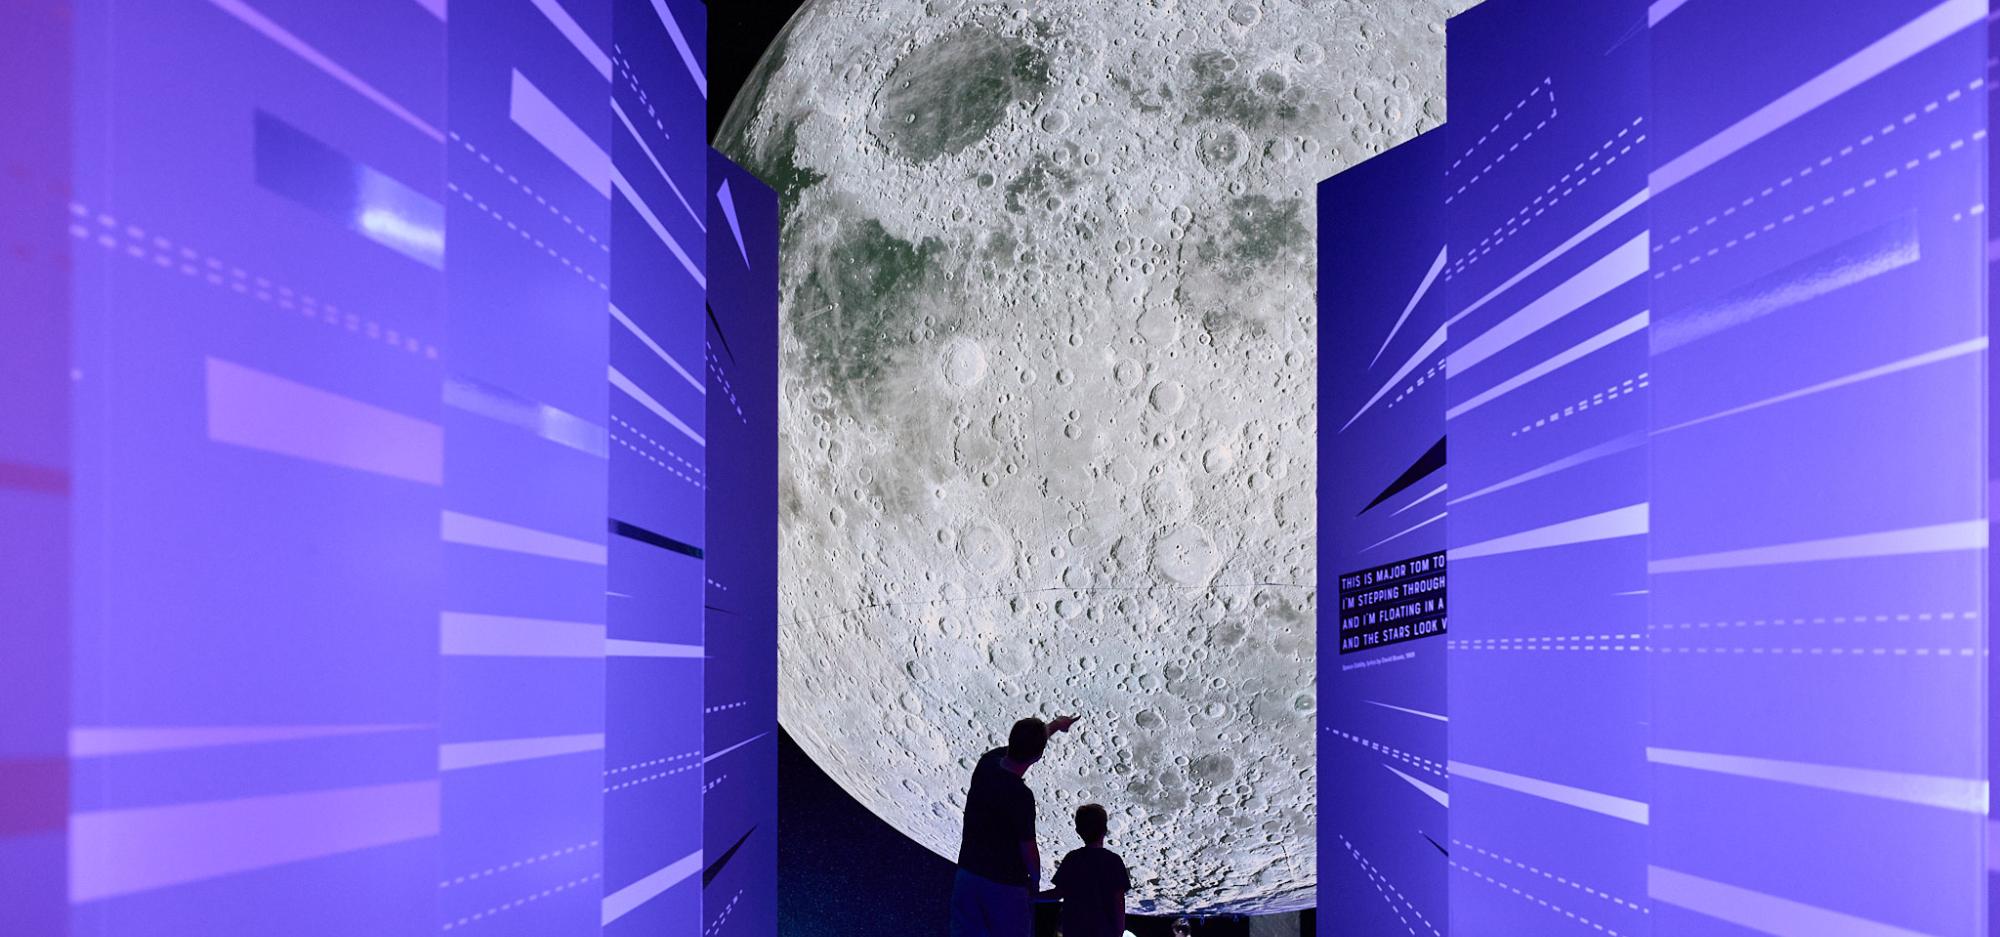 A large moon sculpture is visible down a corridor of brightly lit purple walls designed in a sci-fi aesthetic style with two people who appear small in comparison taking a selfie while in silhouette 